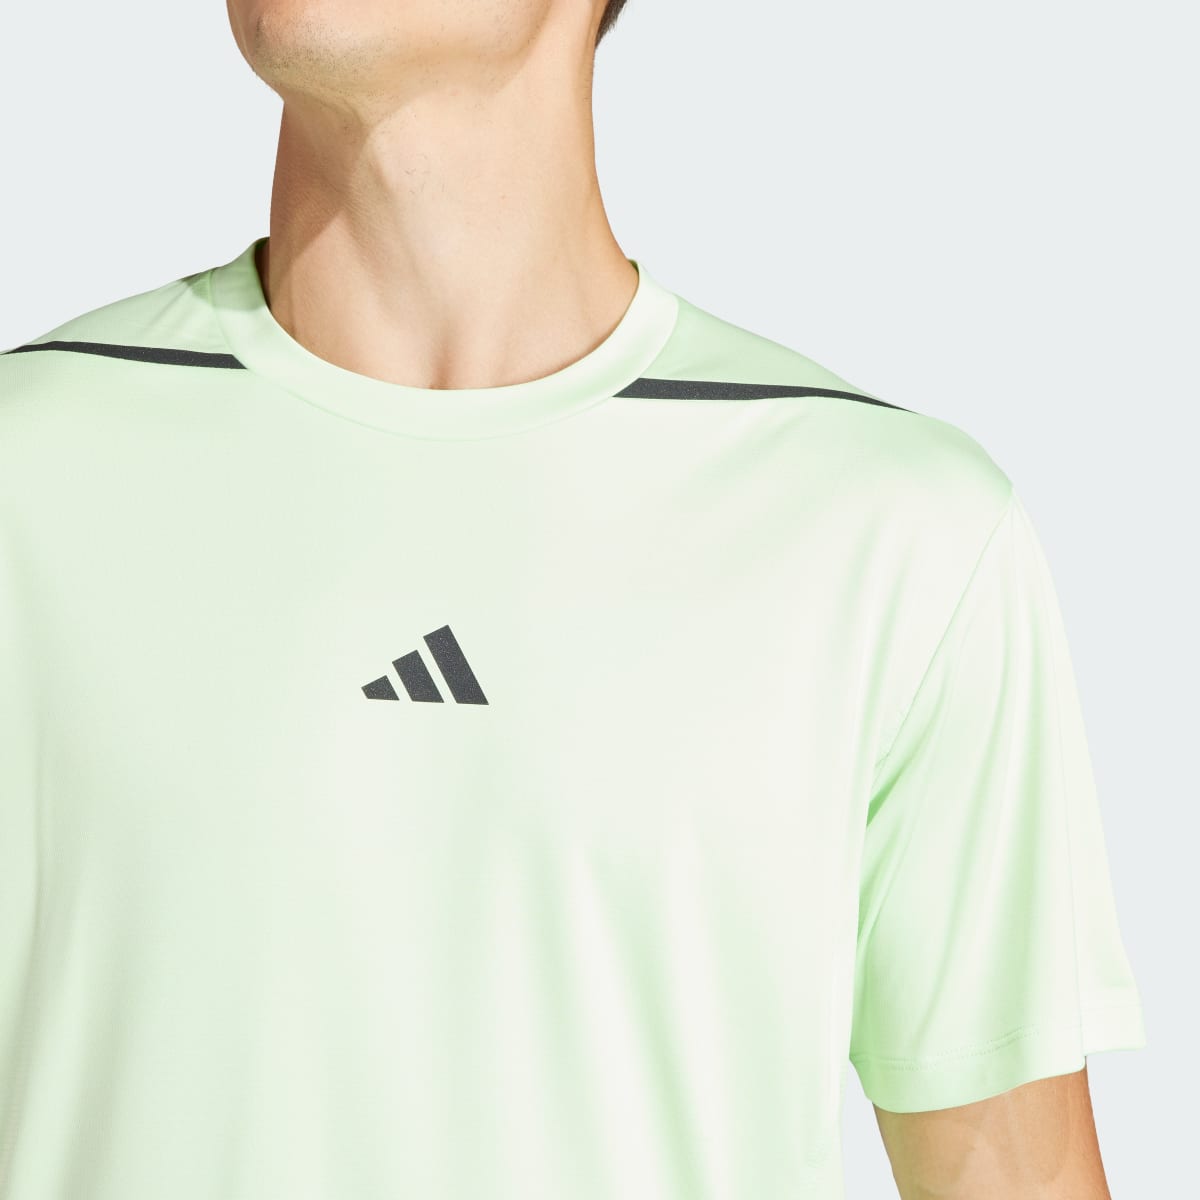 Adidas Designed for Training Adistrong Workout T-Shirt. 6